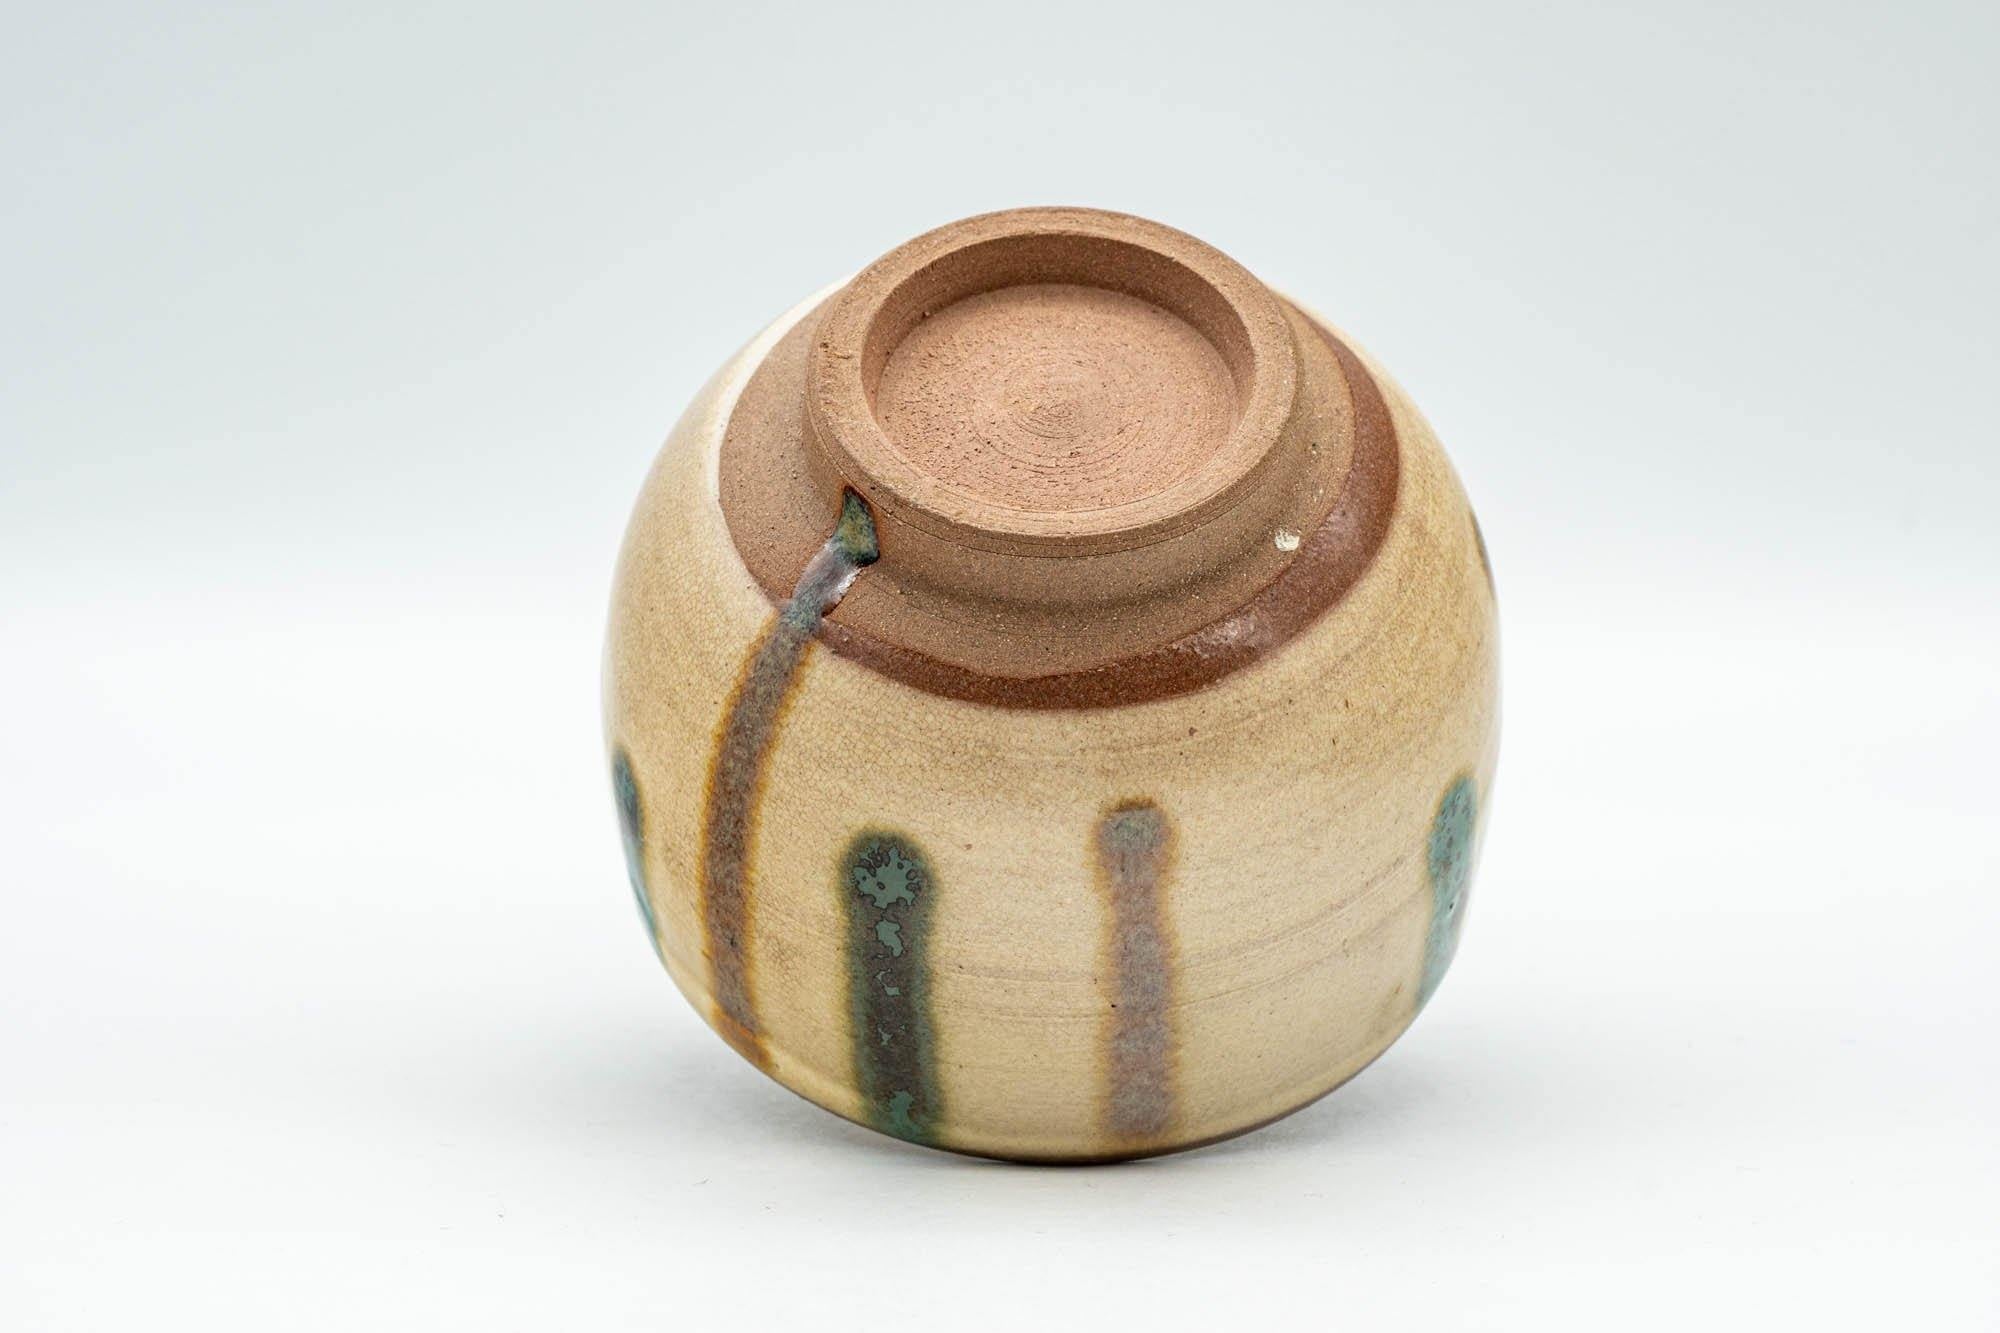 Japanese Teacup - Brown and Blue Striped Drip-Glazed Yunomi - 190ml - Tezumi